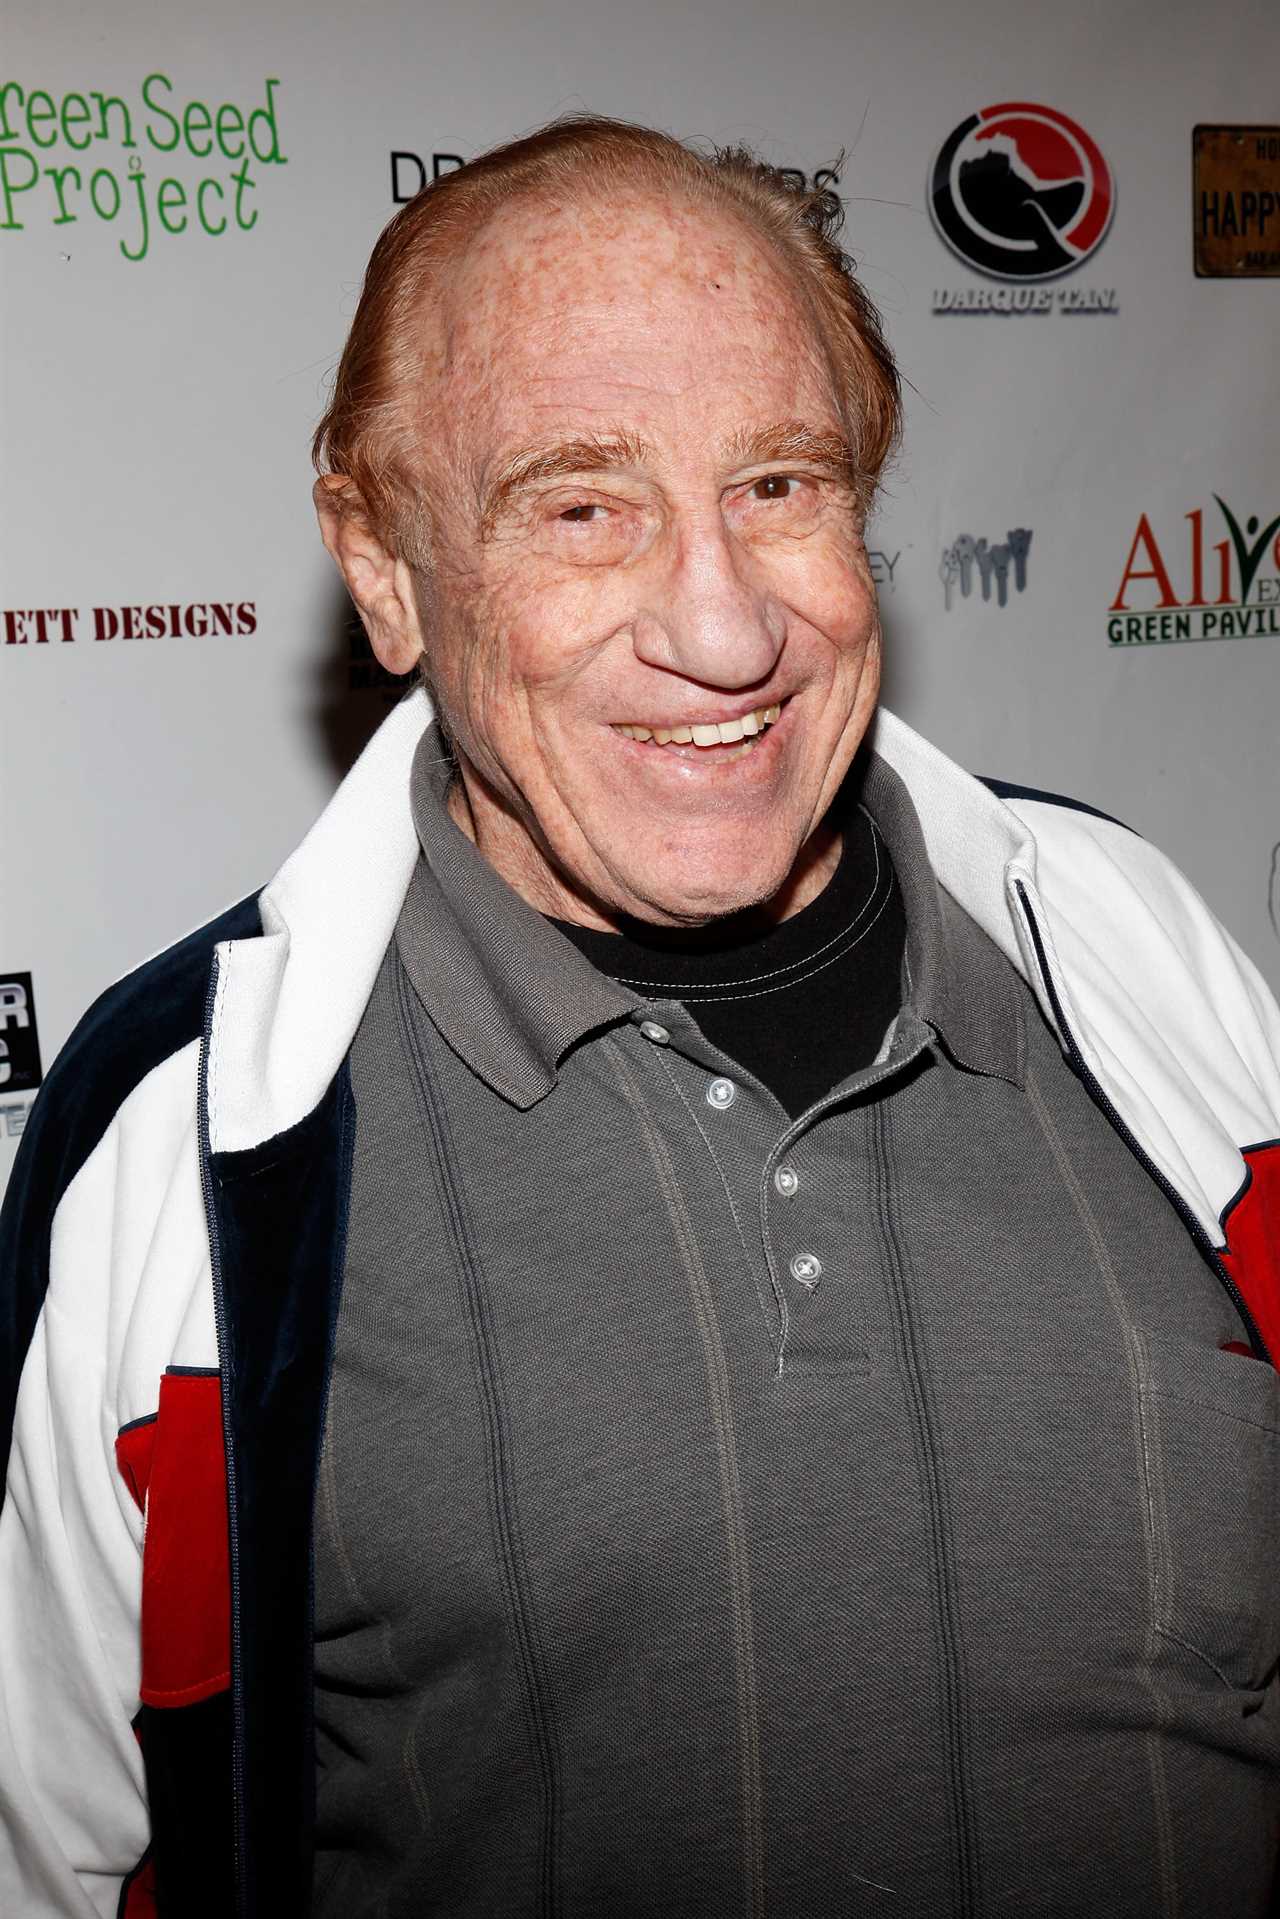 Gene Lebell dies at 89. Tributes to the 'Godfather of MMA and Wrestling' who was a stuntman and 'toughest person alive'